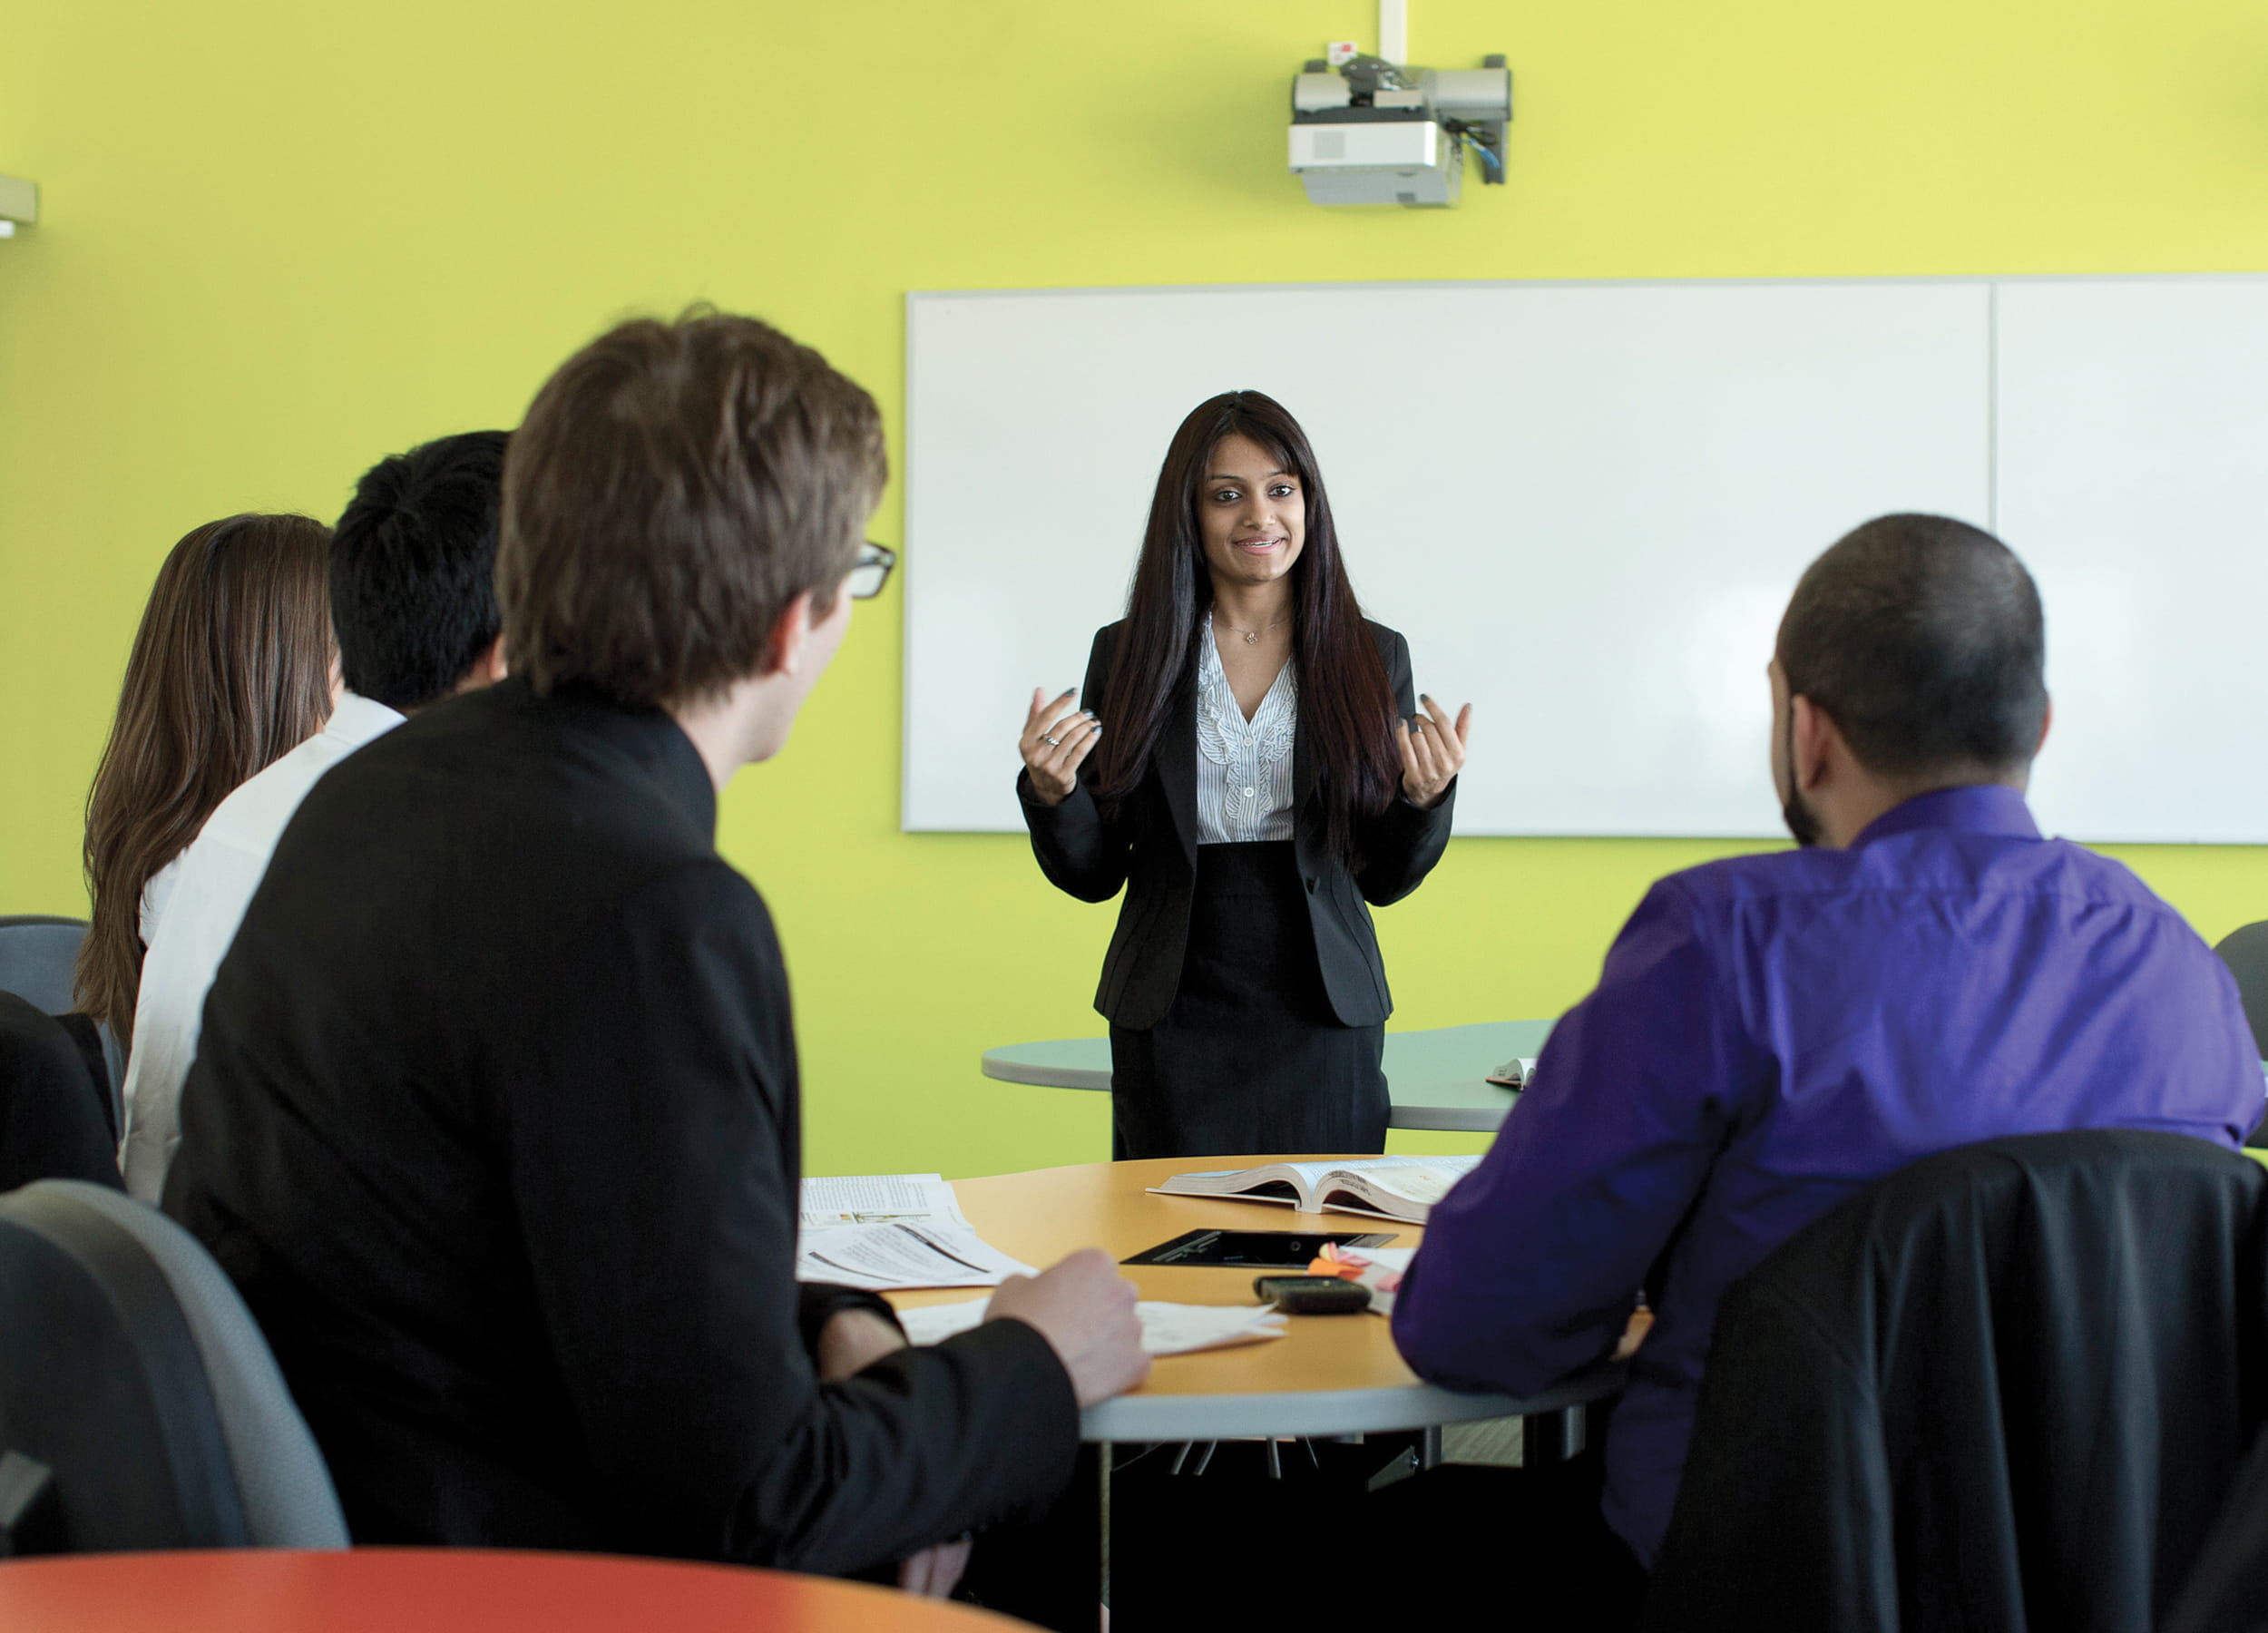 Business Administration instructor and students in a classroom